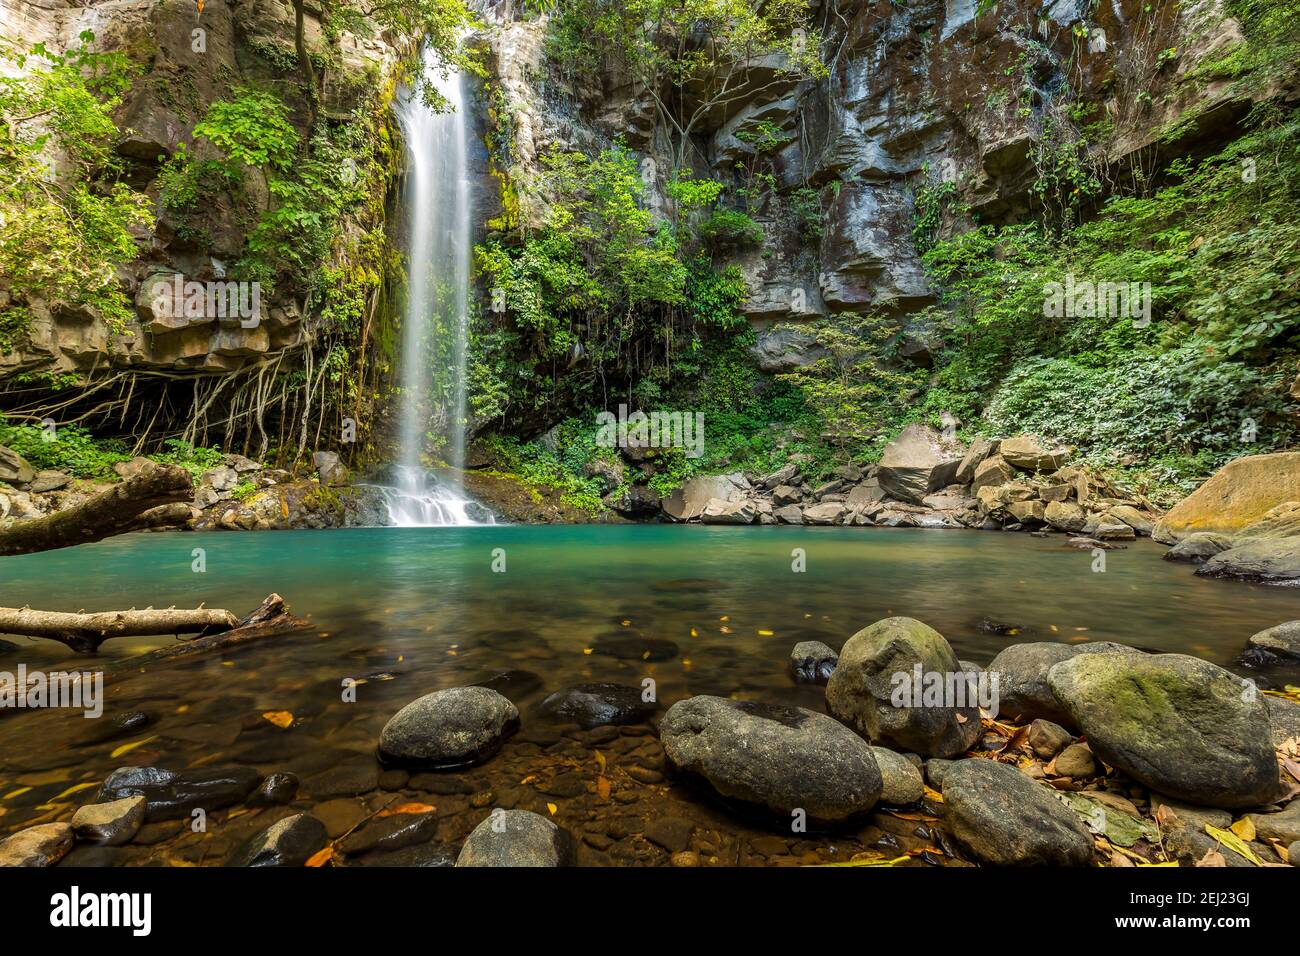 Hidden waterfall surrounded by green trees, vegetation, rocks, leaves floating on green and clear water, Rincon de la Vieja, Guanacaste, Costa Rica Stock Photo